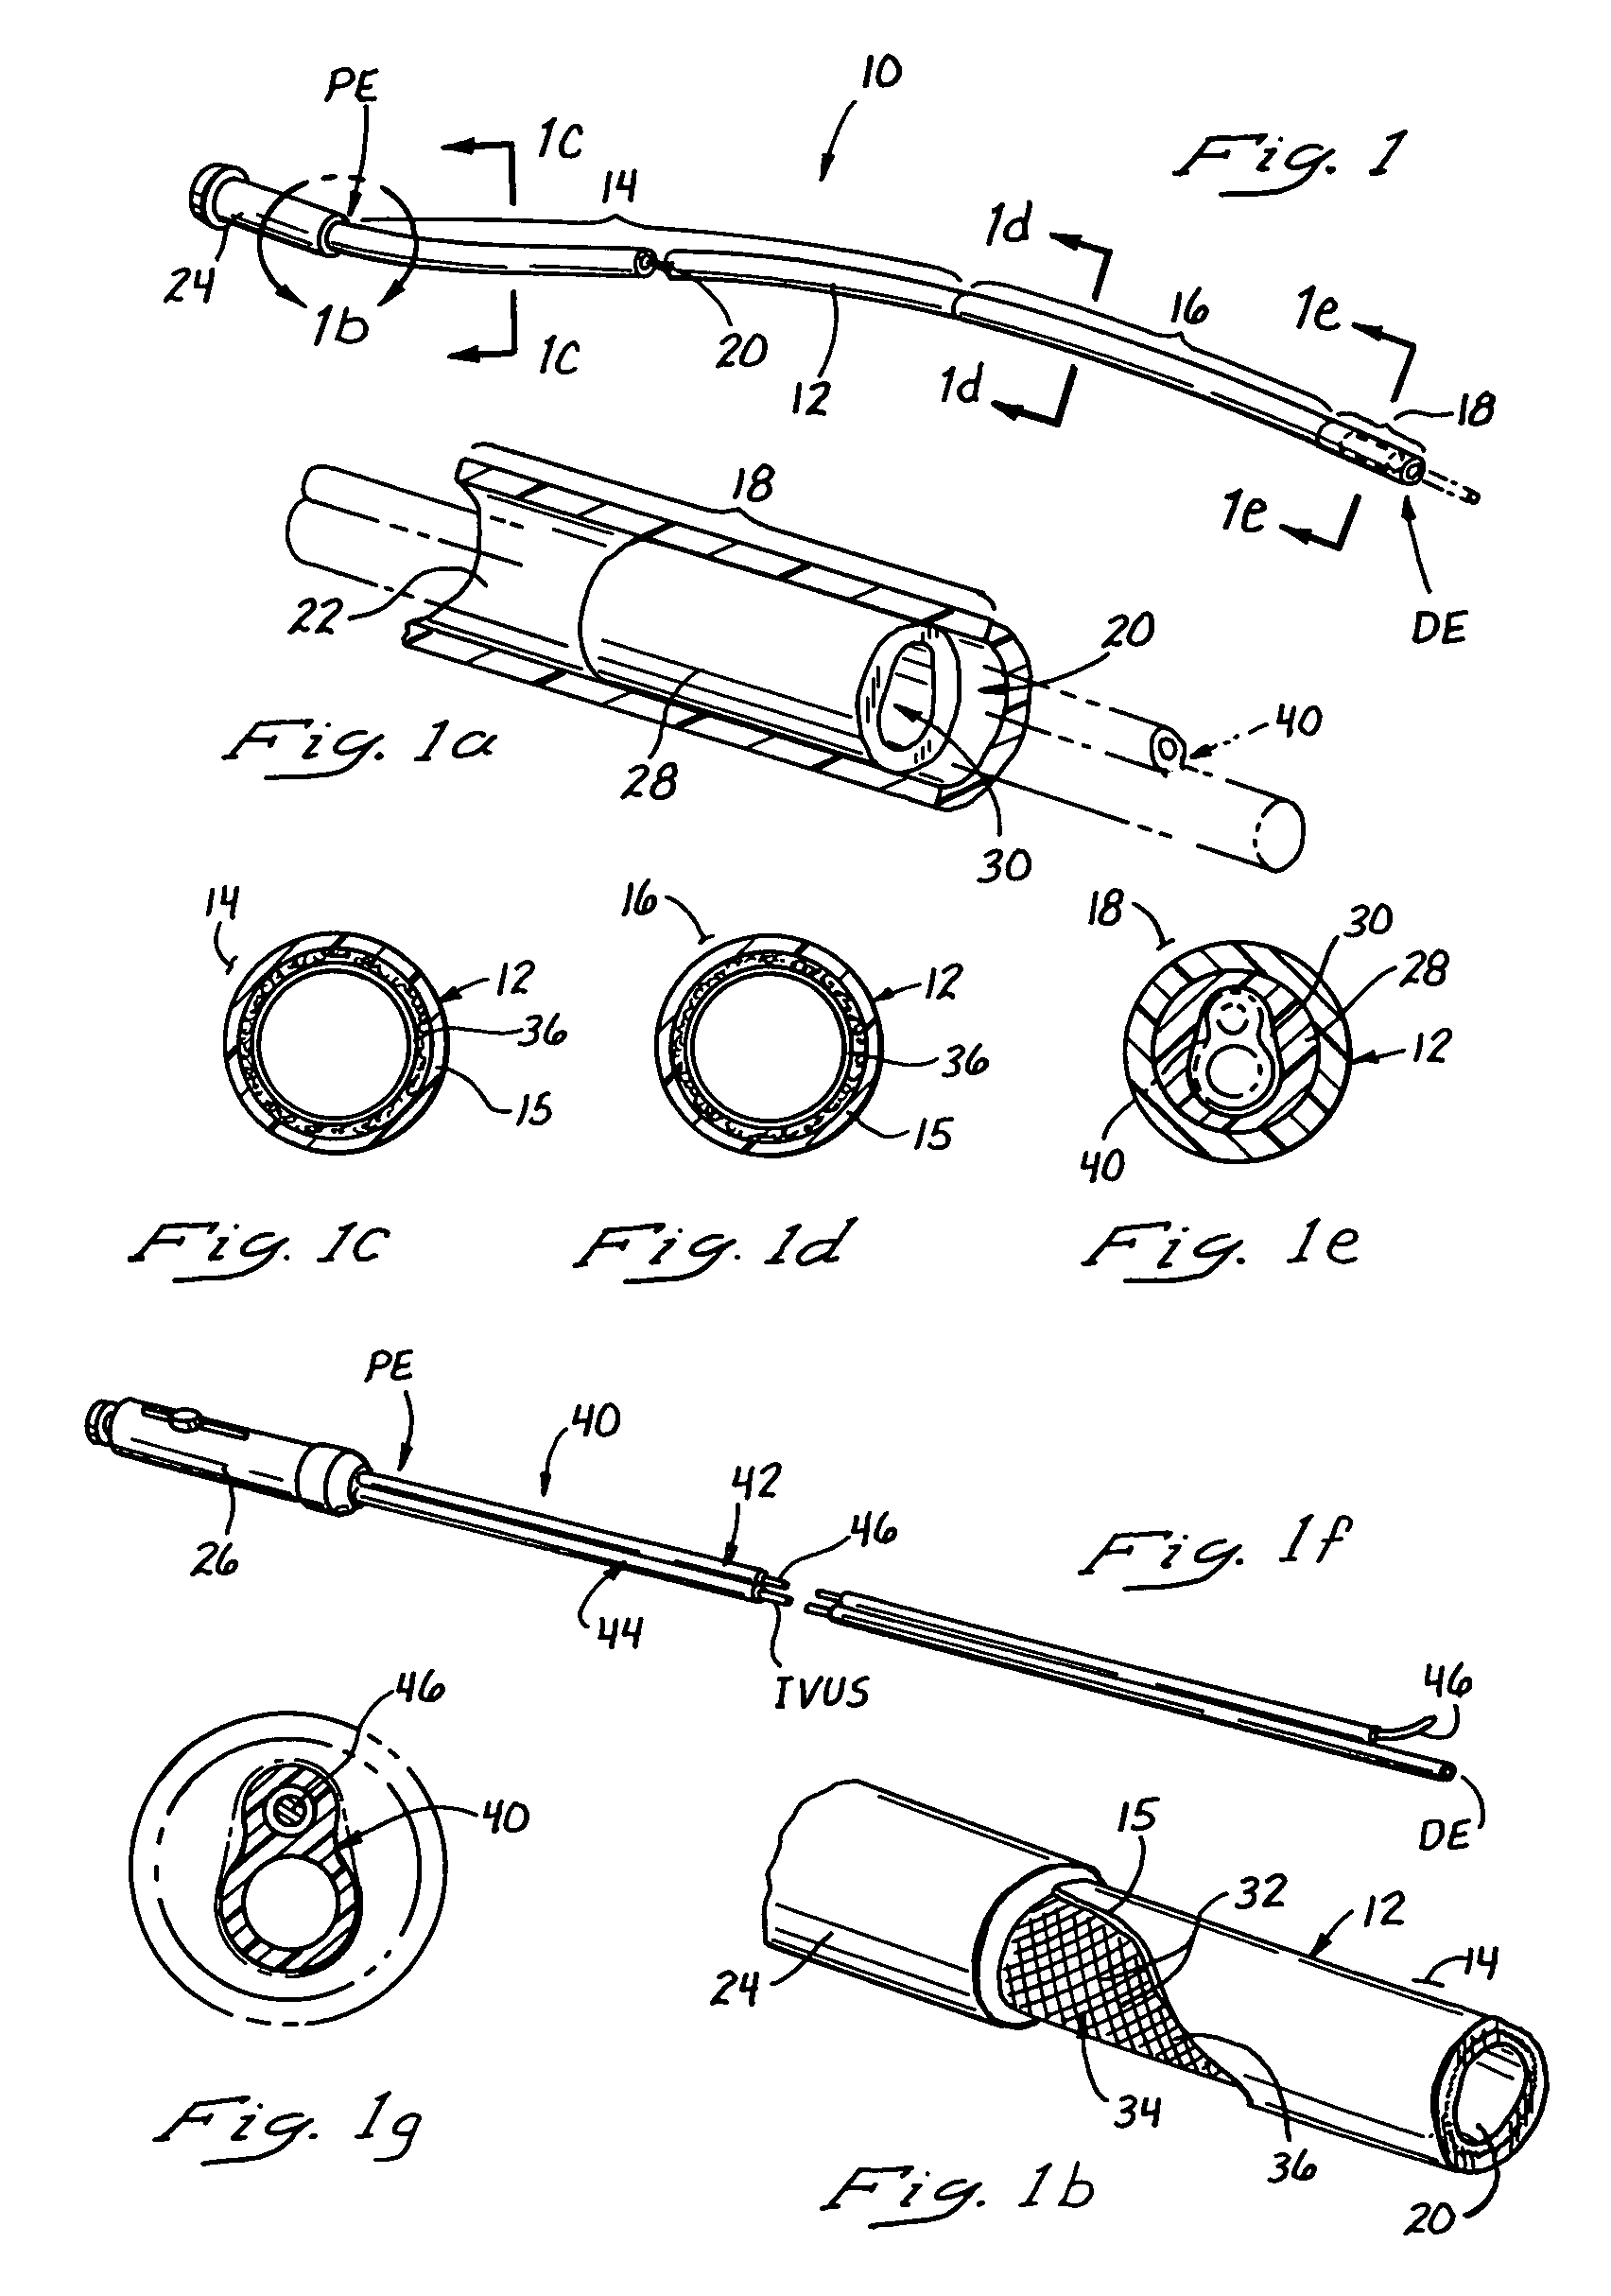 Catheters and related devices for forming passageways between blood vessels or other anatomical structures